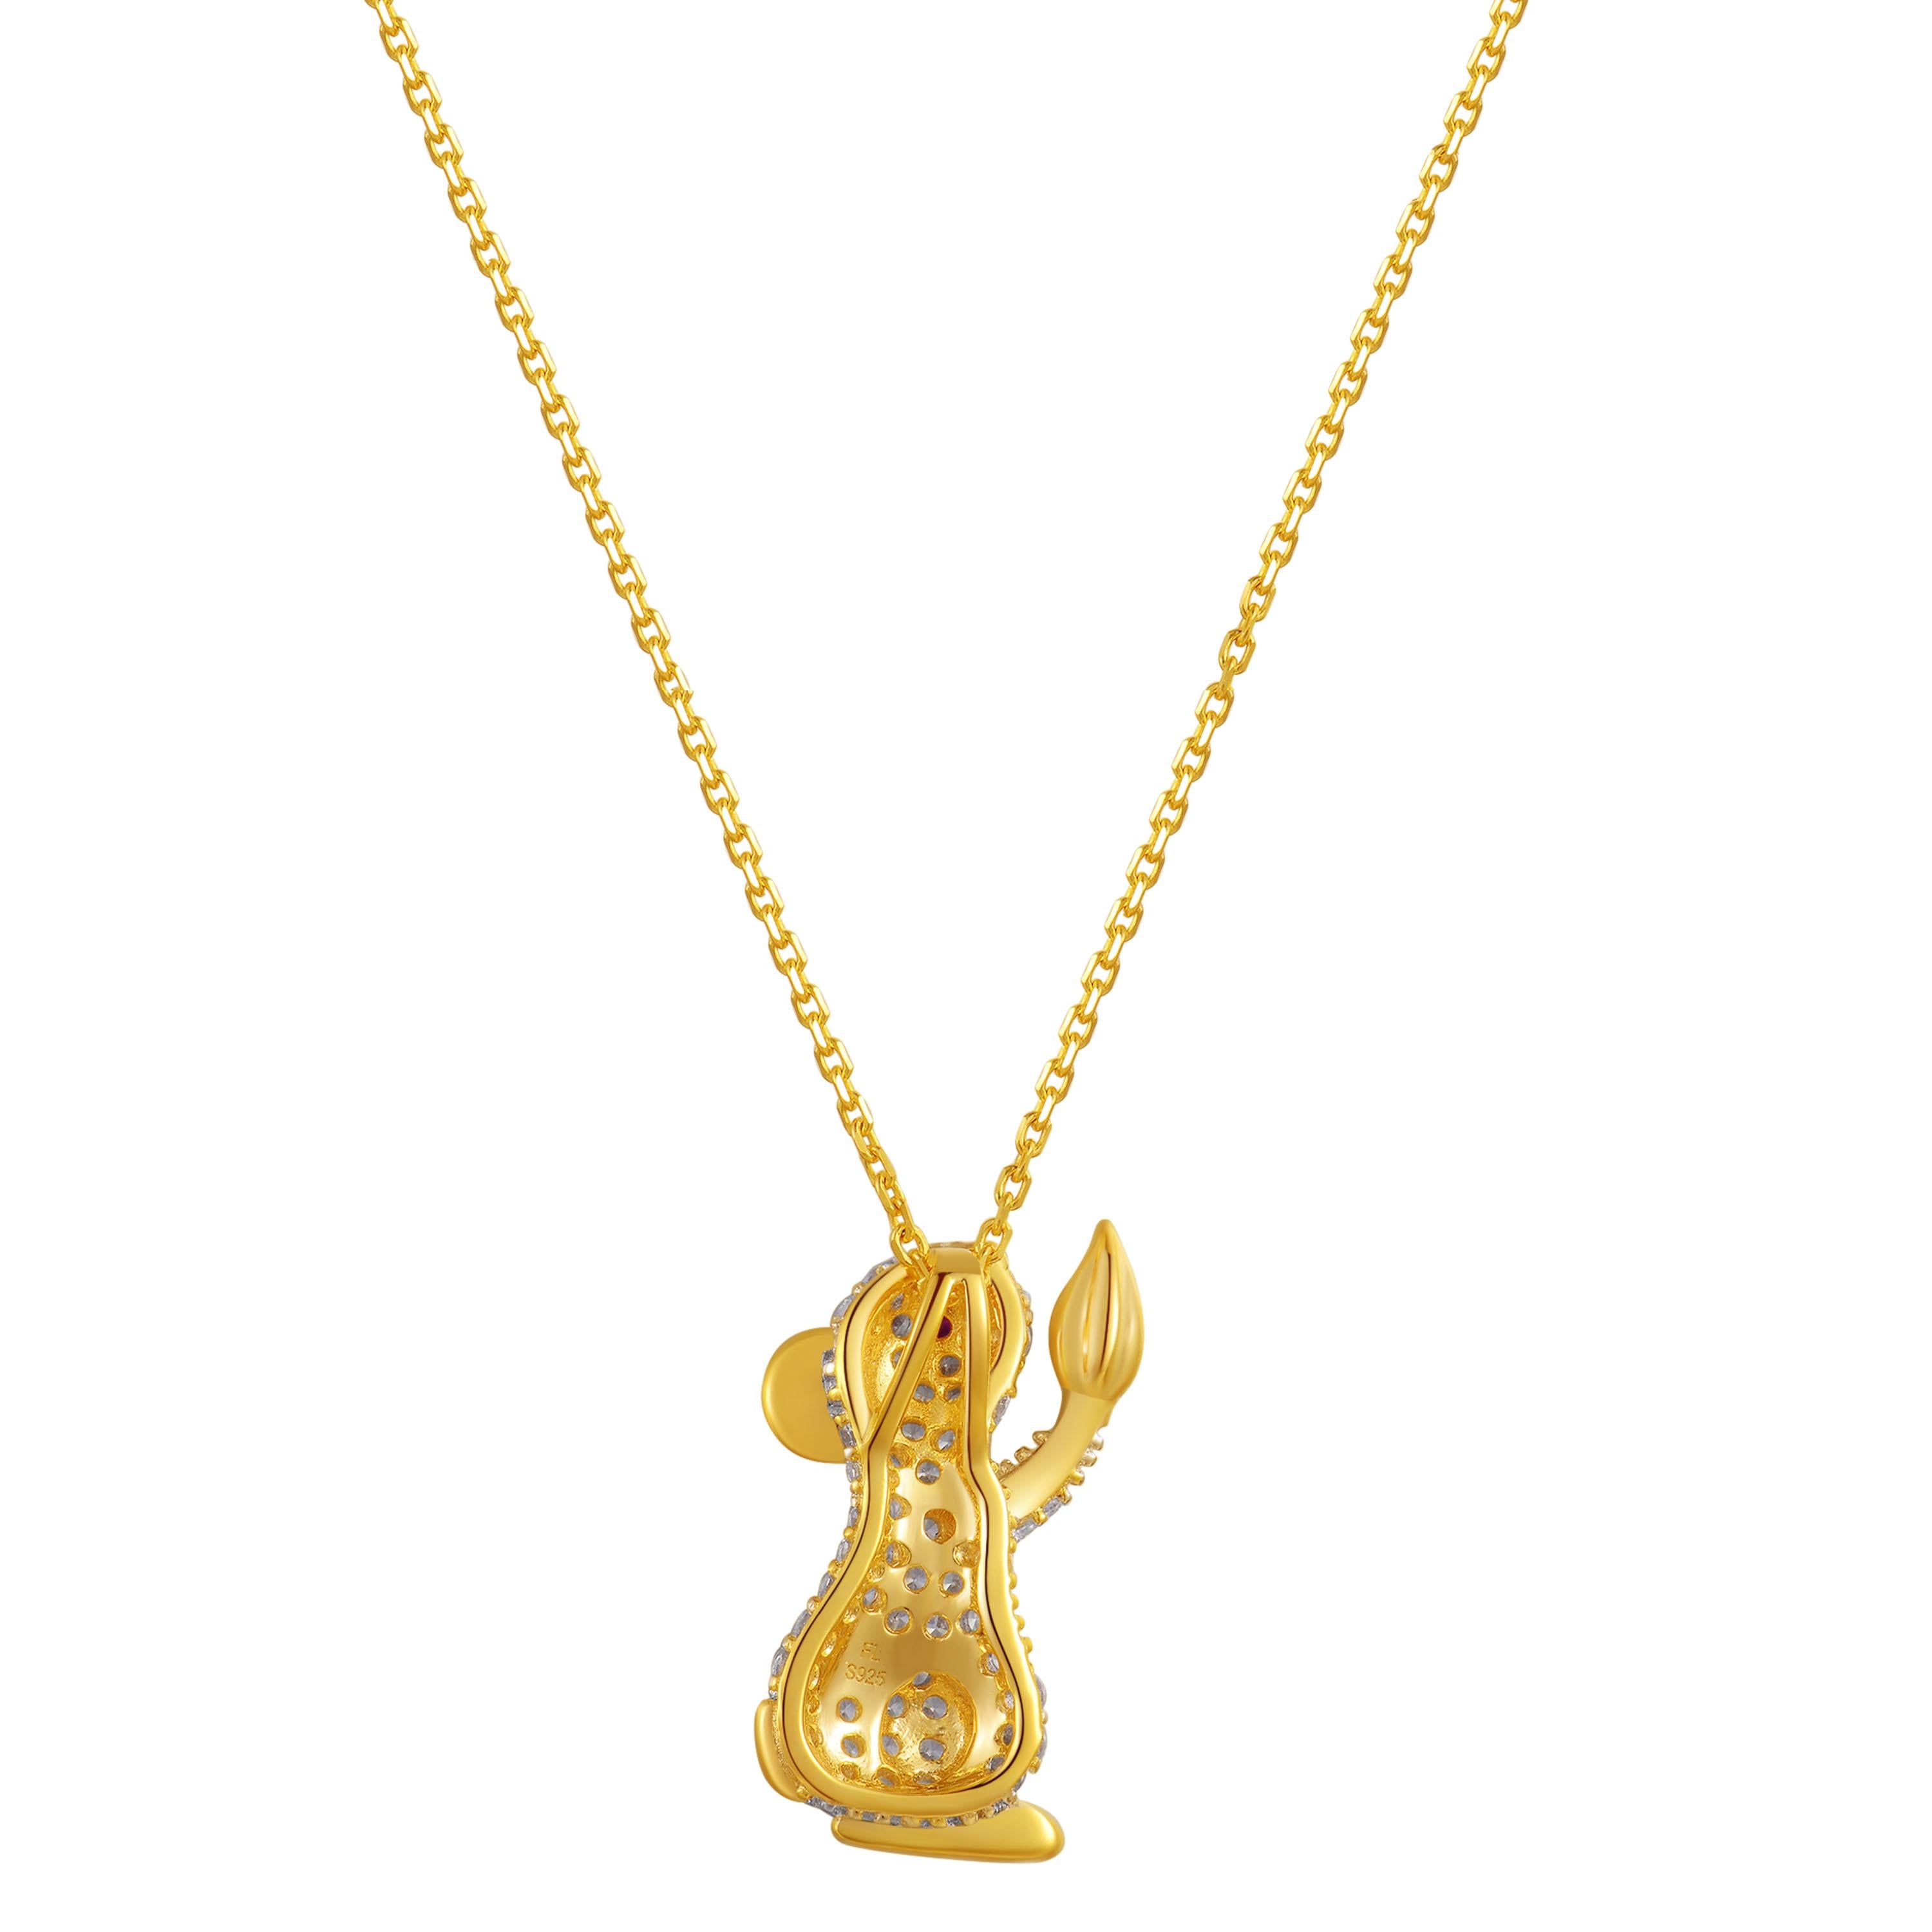 This limited edition jewel beautifully synchronises with the element and lucky colour of 2020: metal and gold. Bring a little charm to your wardrobe with the Year of the Rat pendant. Rat pendant encrusted with white cubic zirconia and red cubic